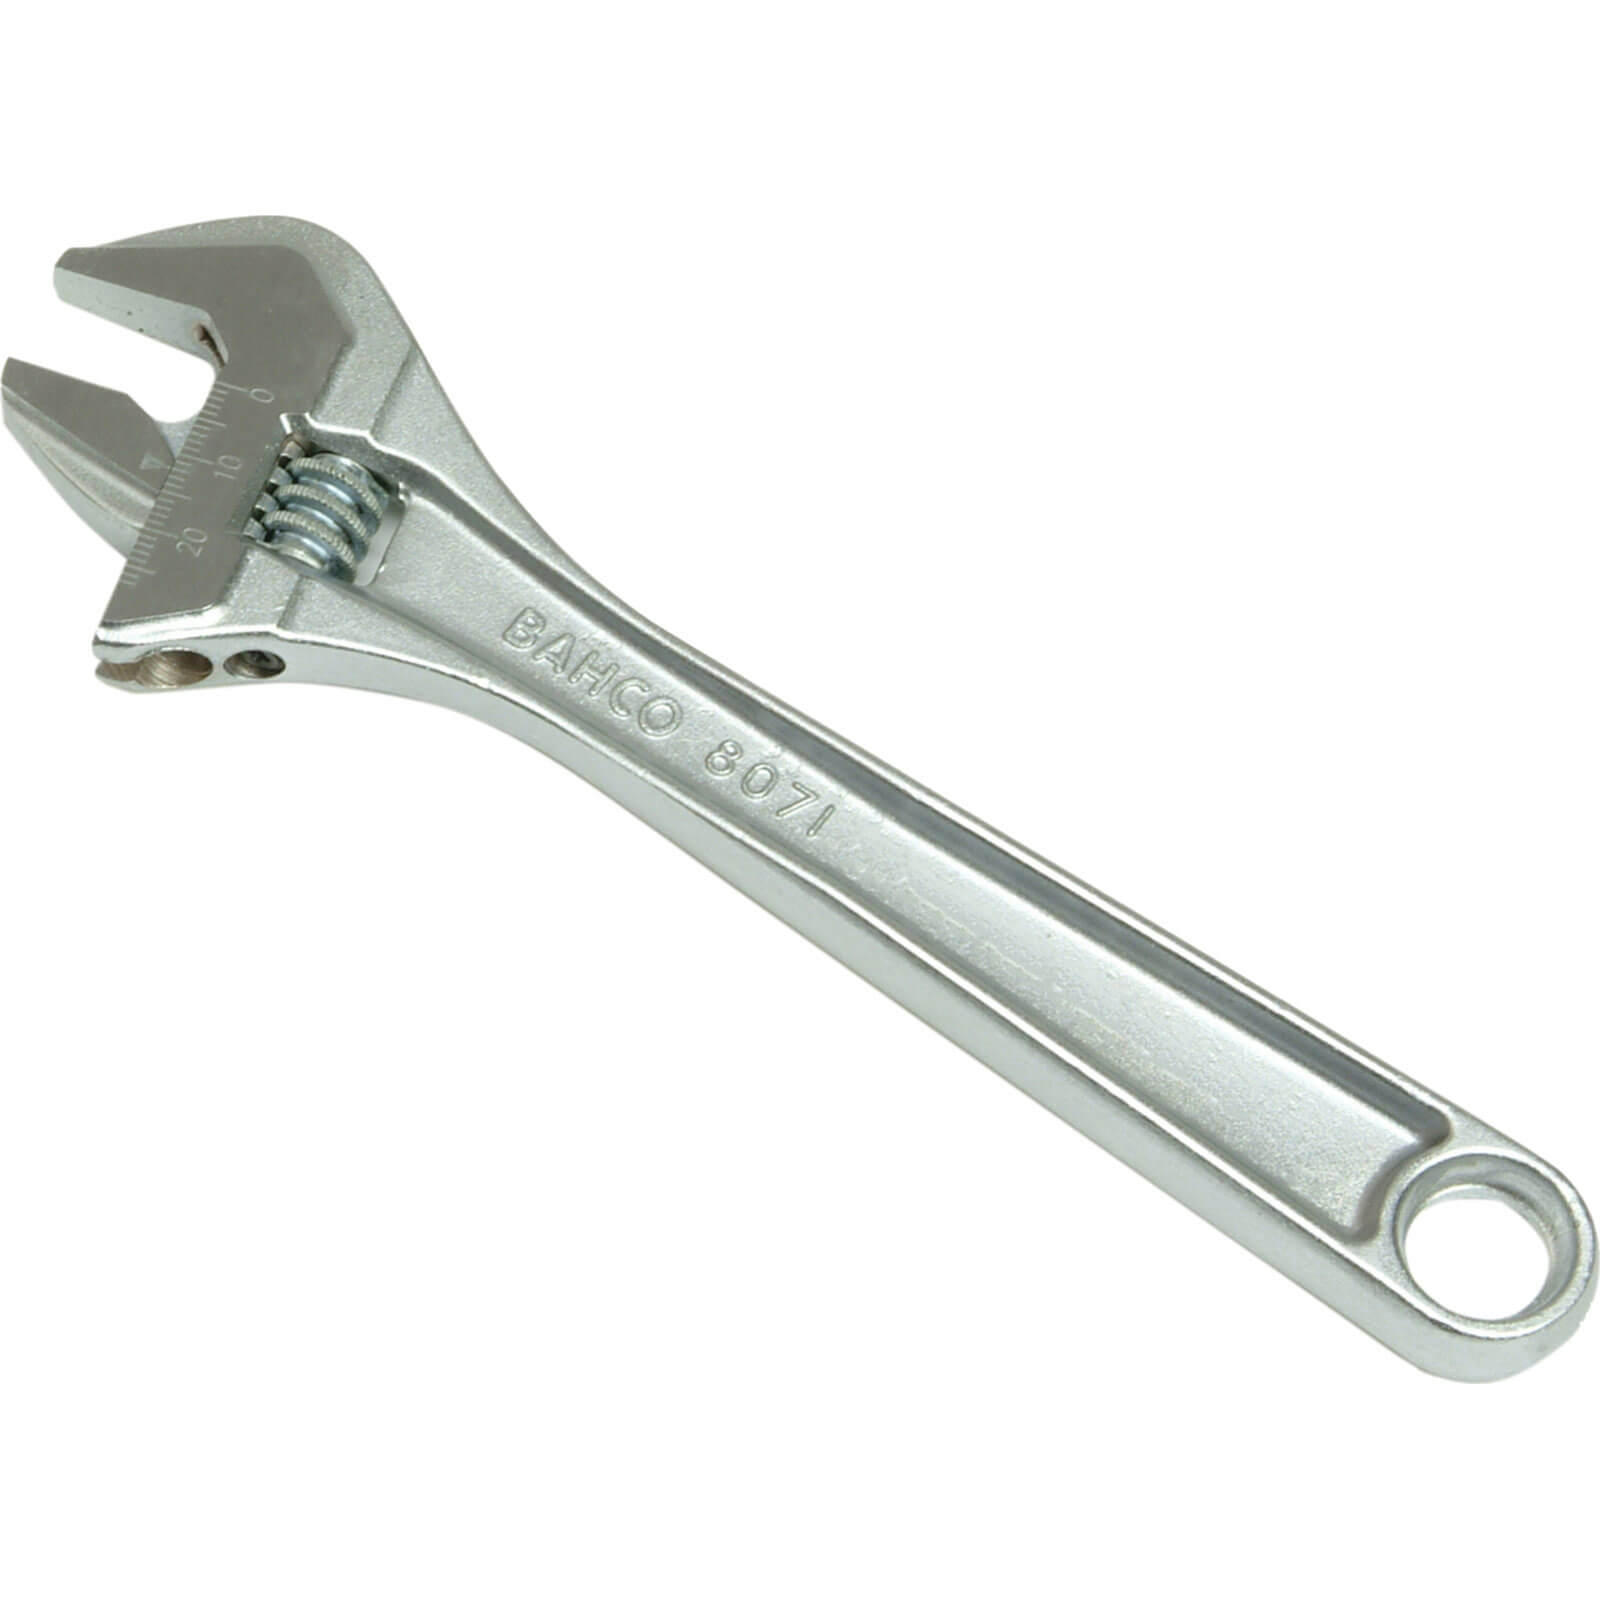 Photo of Bahco 80 Series Adjustable Spanner 450mm